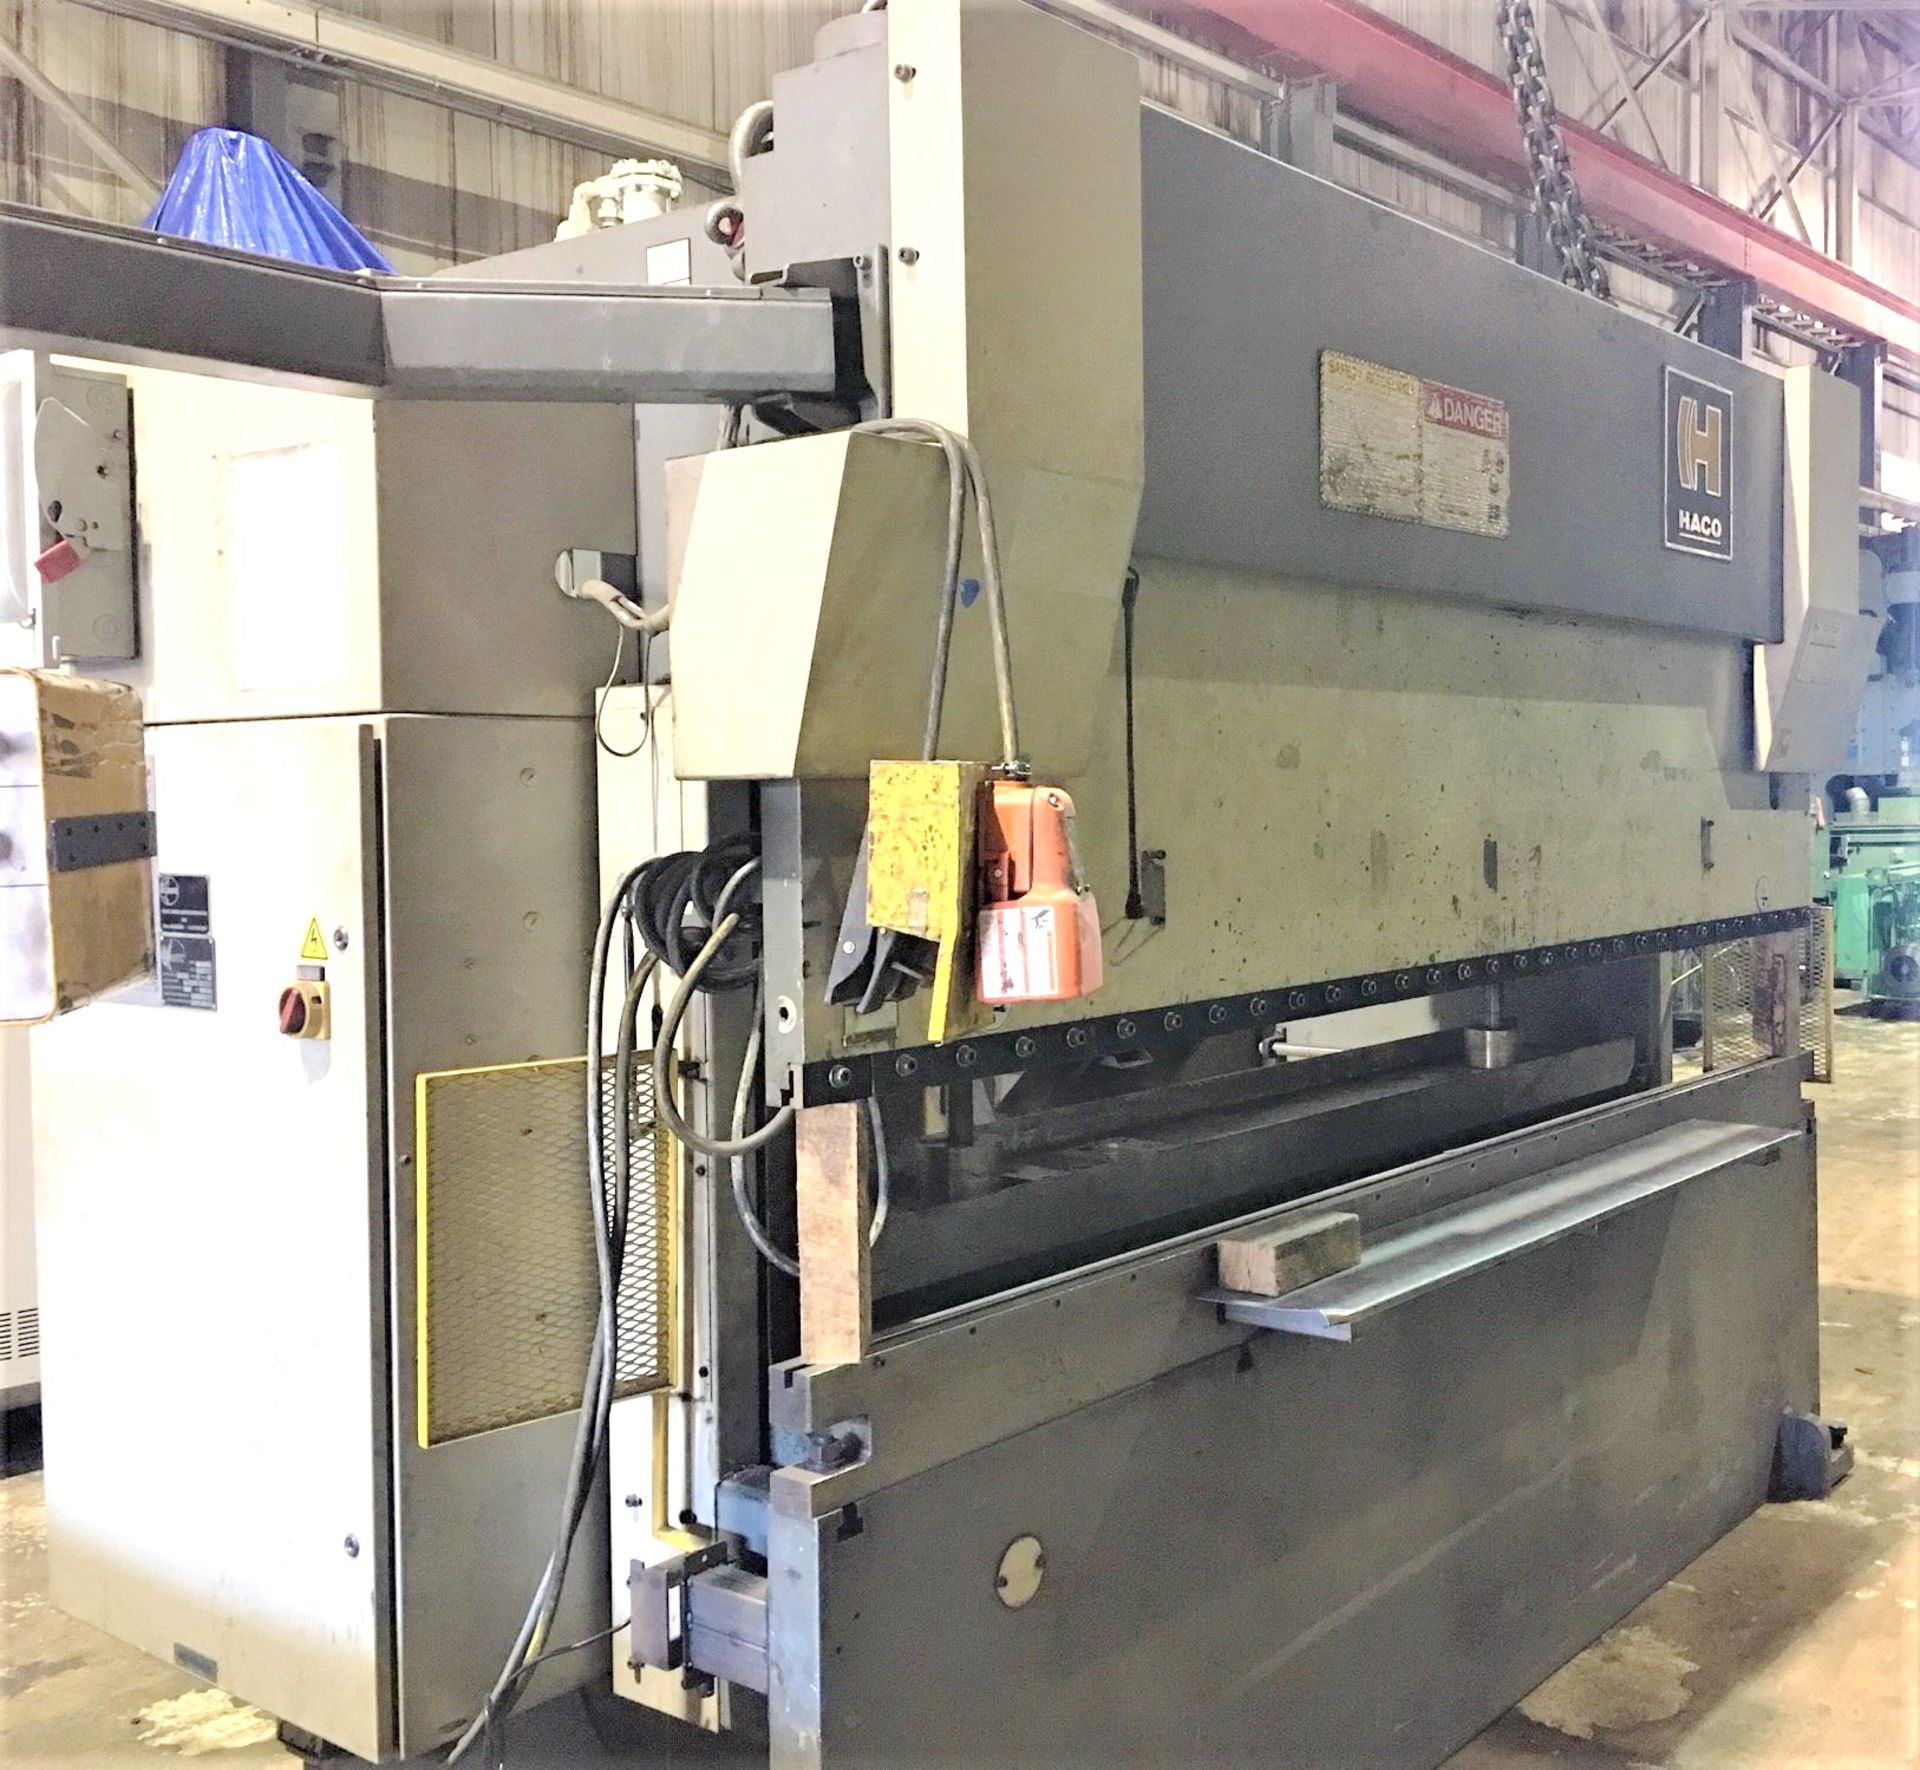 Haco Atlantic CNC Hydraulic Press Brake 120 Ton x 10', Located In Painesville, OH - 8615P - Image 3 of 14